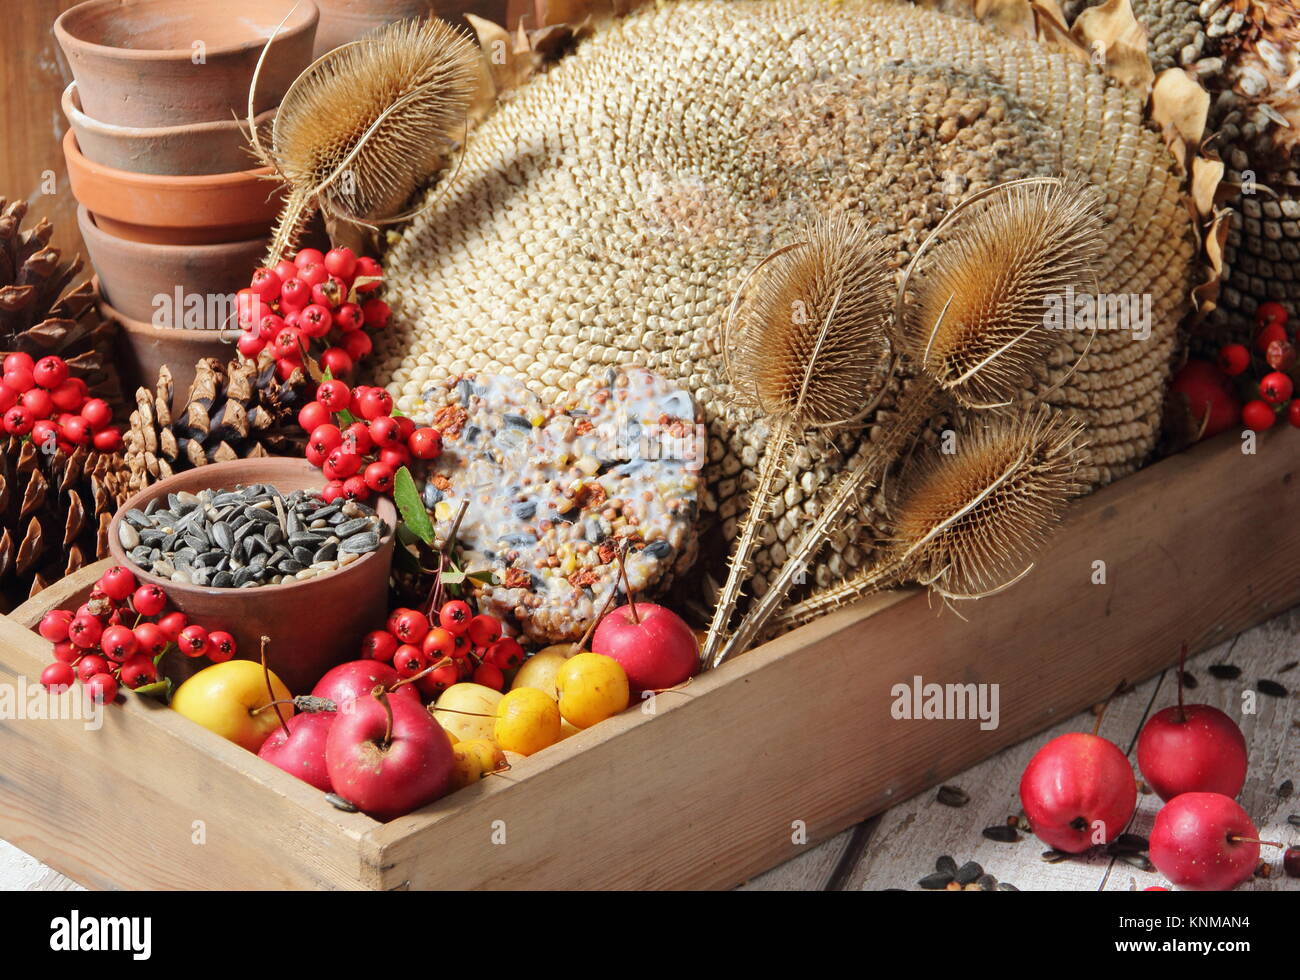 Bird food buffet ingredients including crab apples, sunflower seeds, teasel seed heads, pyracantha berries and a suet cake, gathered in a wooden tray Stock Photo